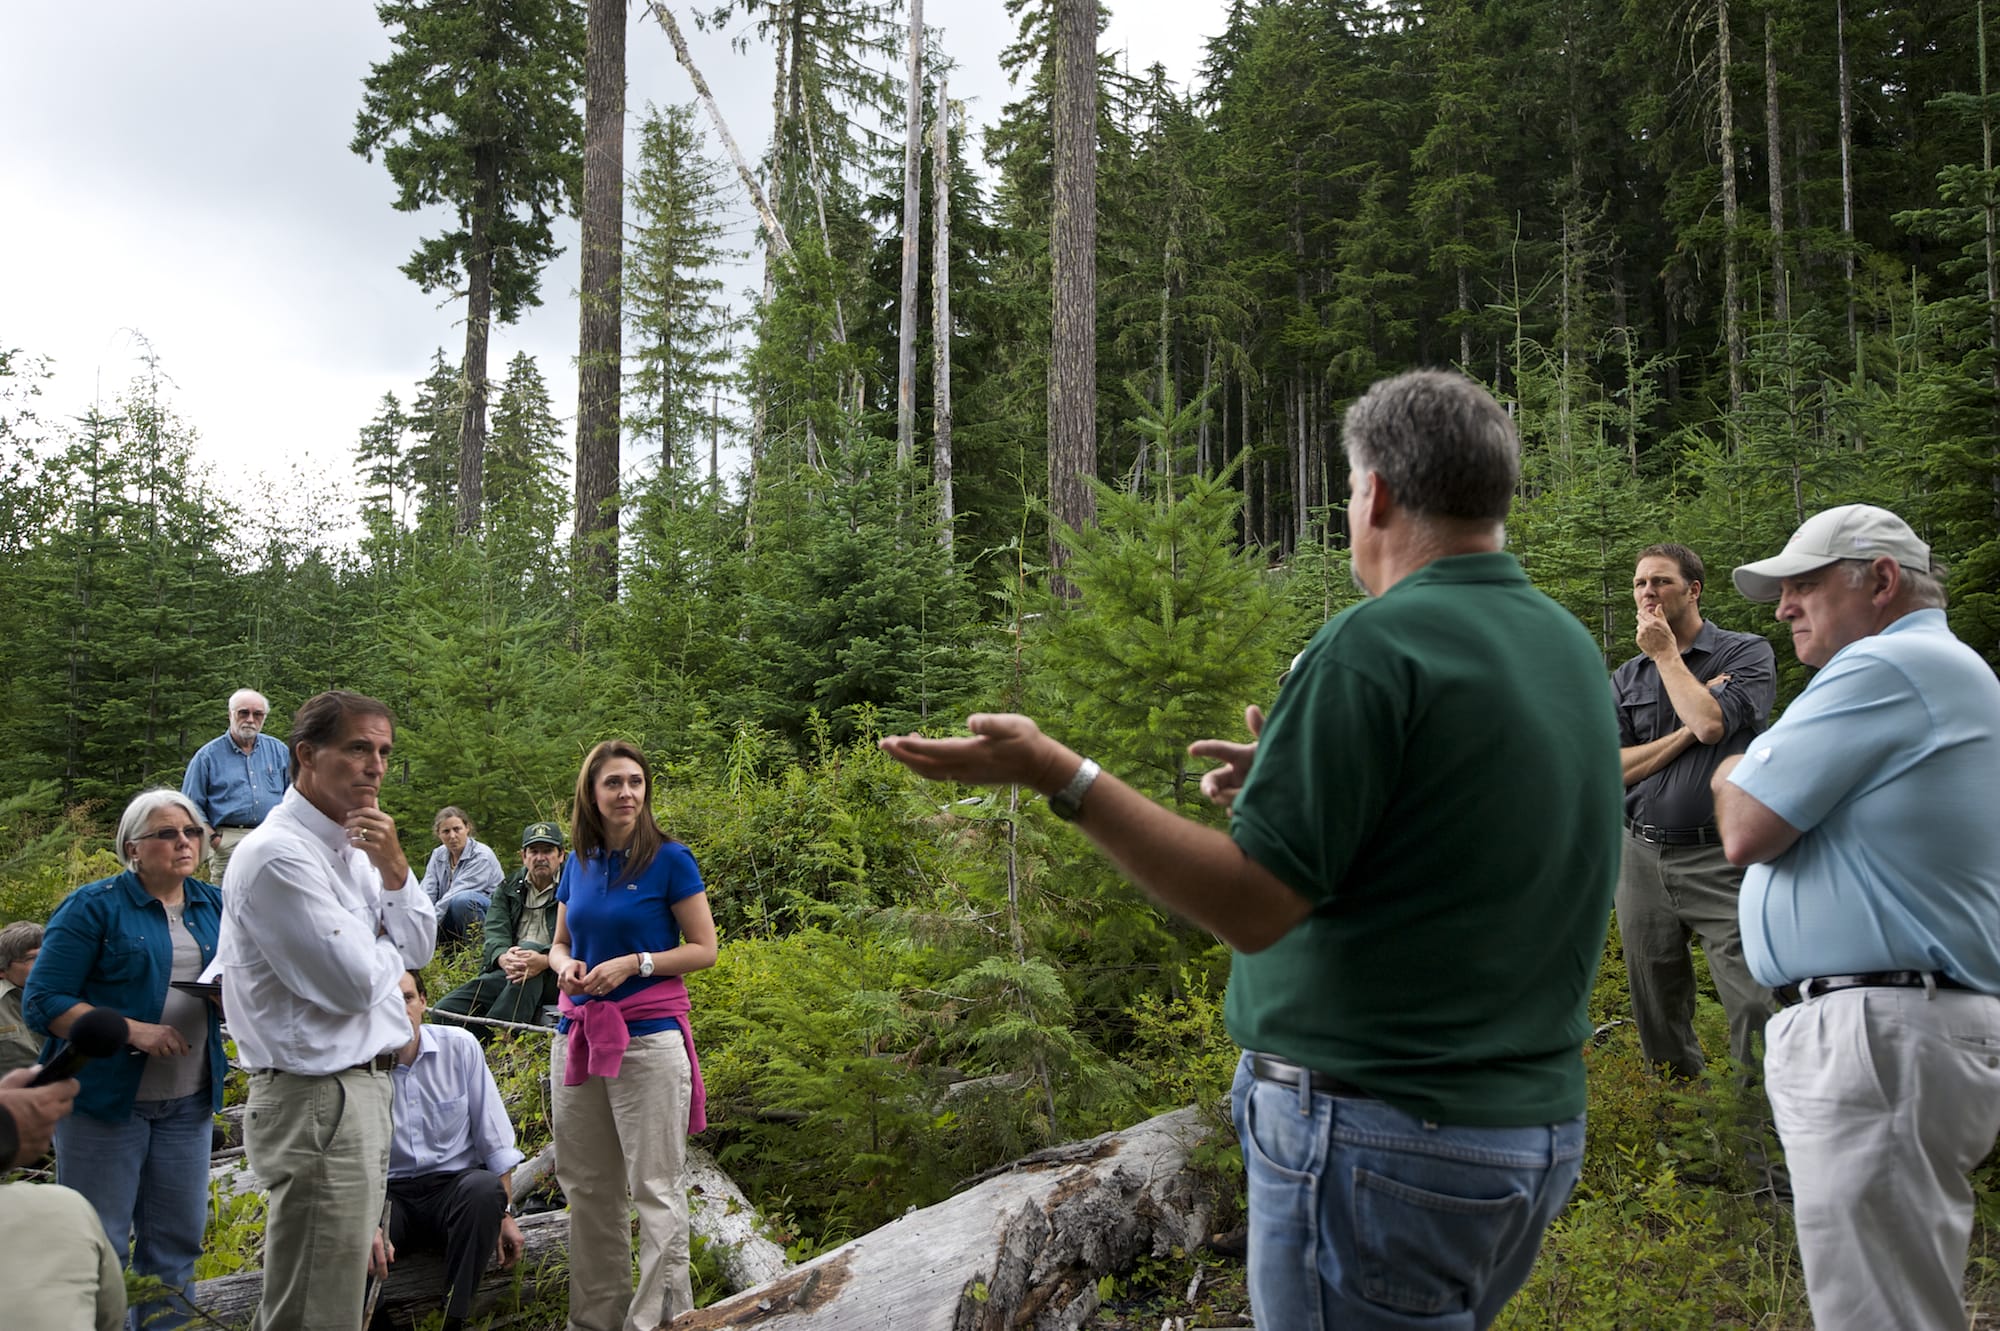 U.S. Rep. Jaime Herrera Beutler, R-Camas, hosted a roundtable discussion and tour of the Gifford Pinchot National Forest with U.S. Fish and Wildlife Service Director Dan Ashe, left, community leaders and other officials, such as Rep.